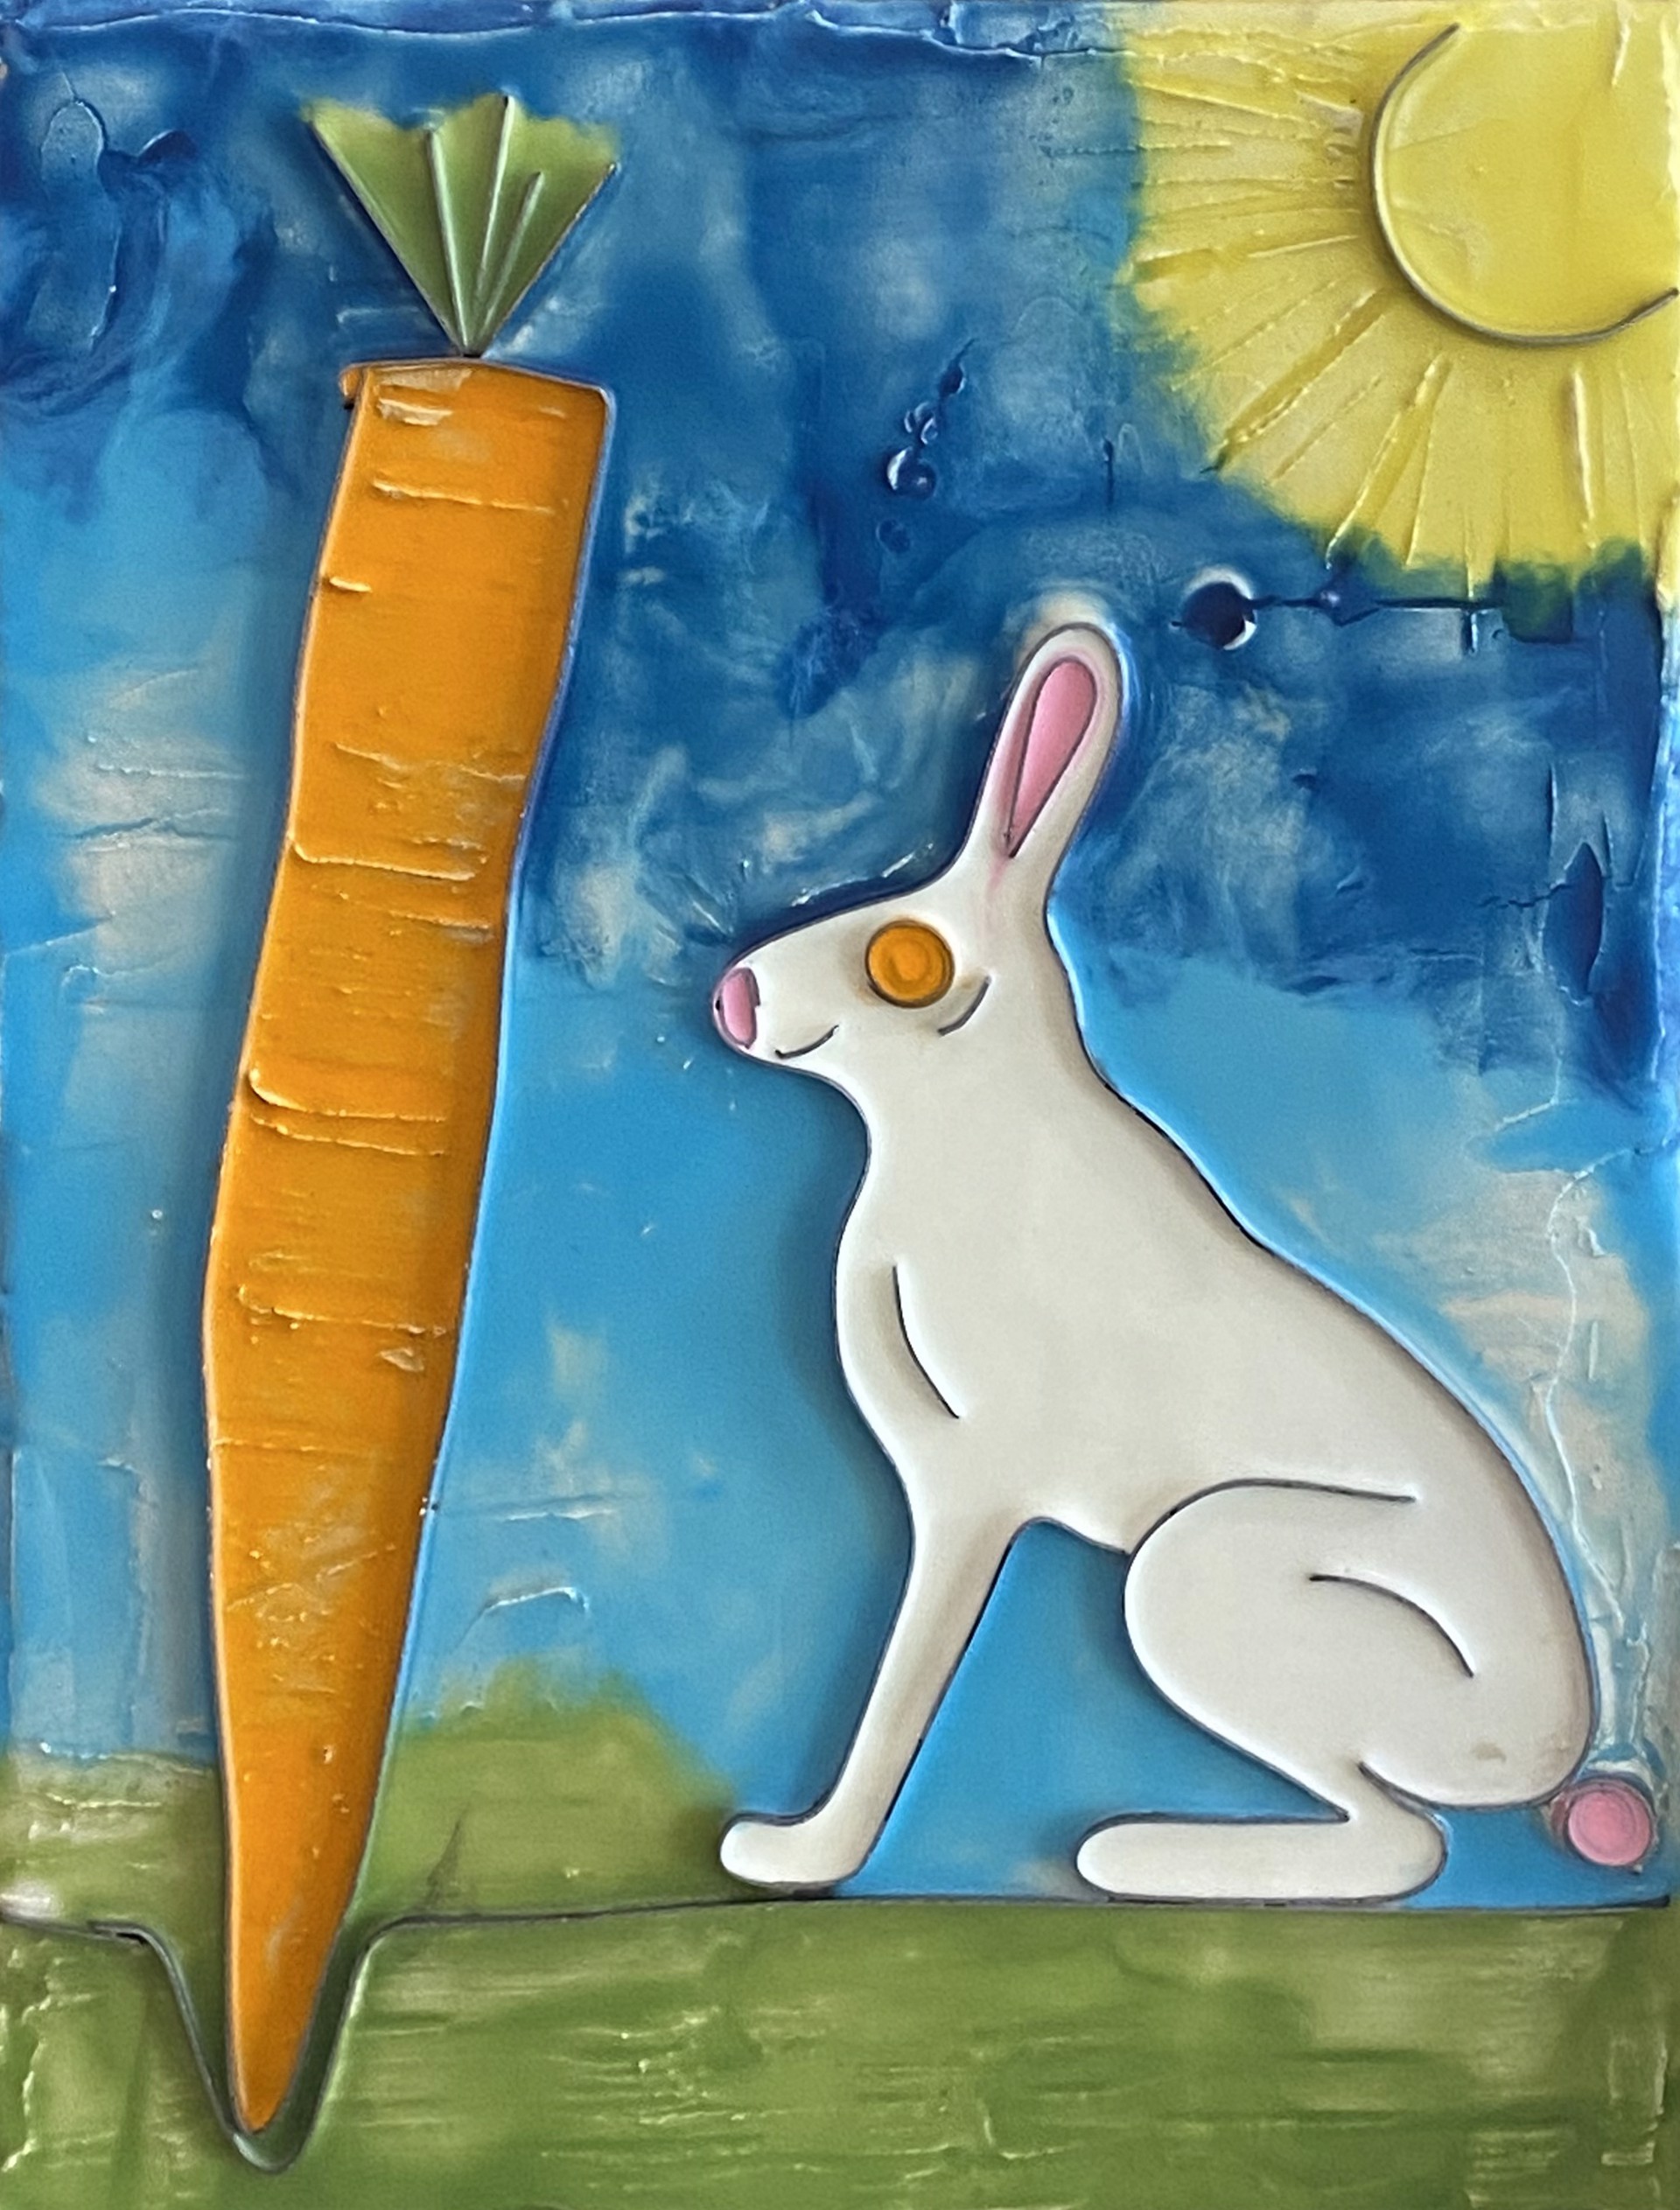 Carrot For Your Thoughts! by Scott Connelly